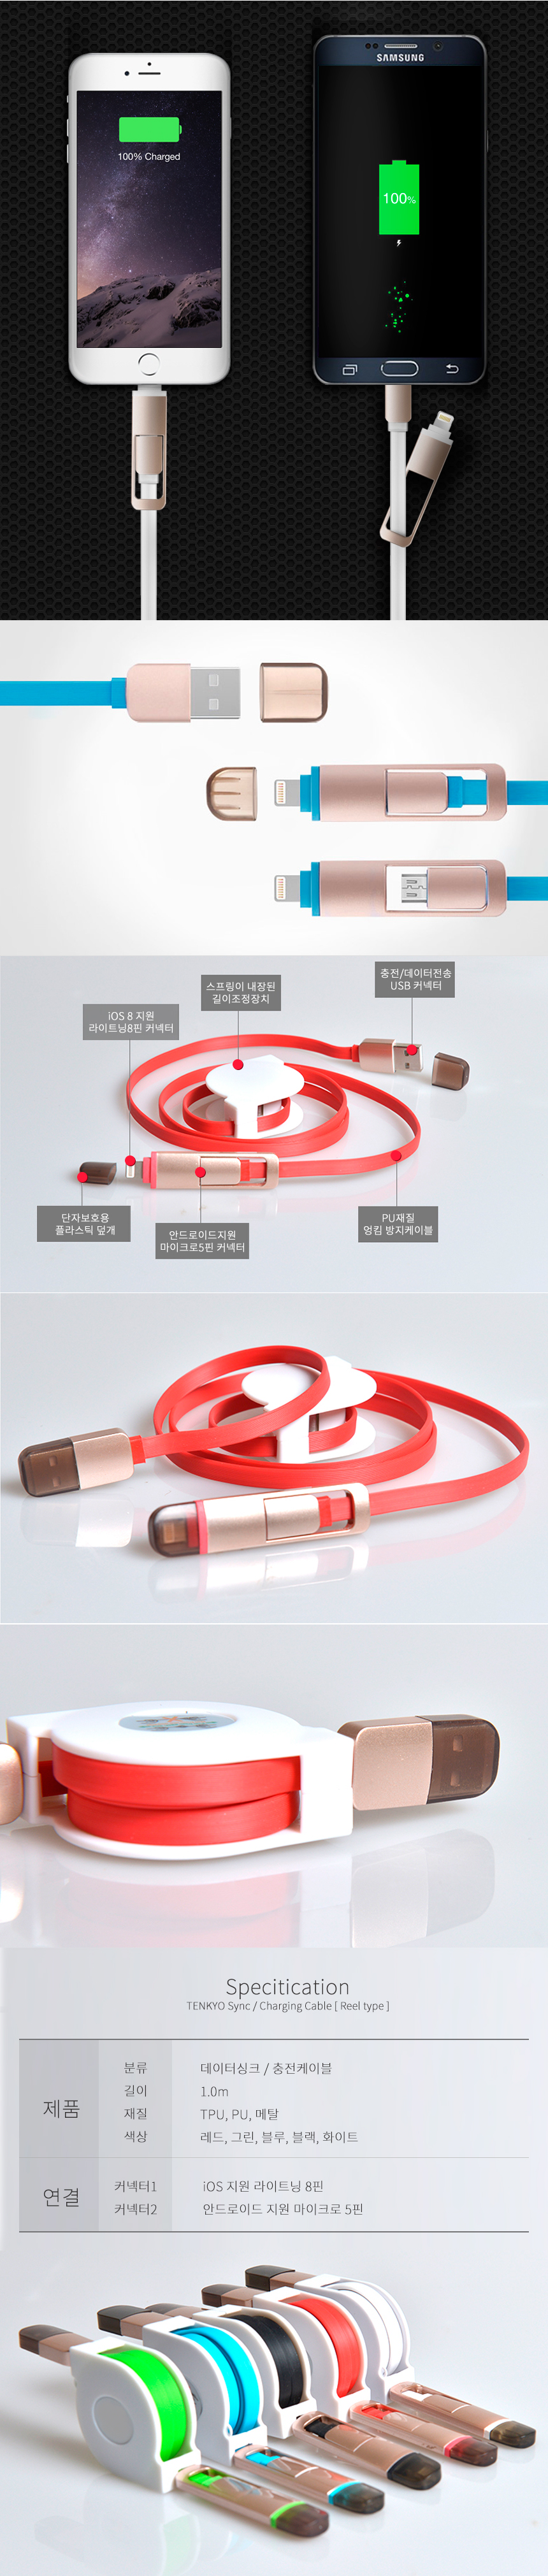 detail_usb_cable_02.jpg